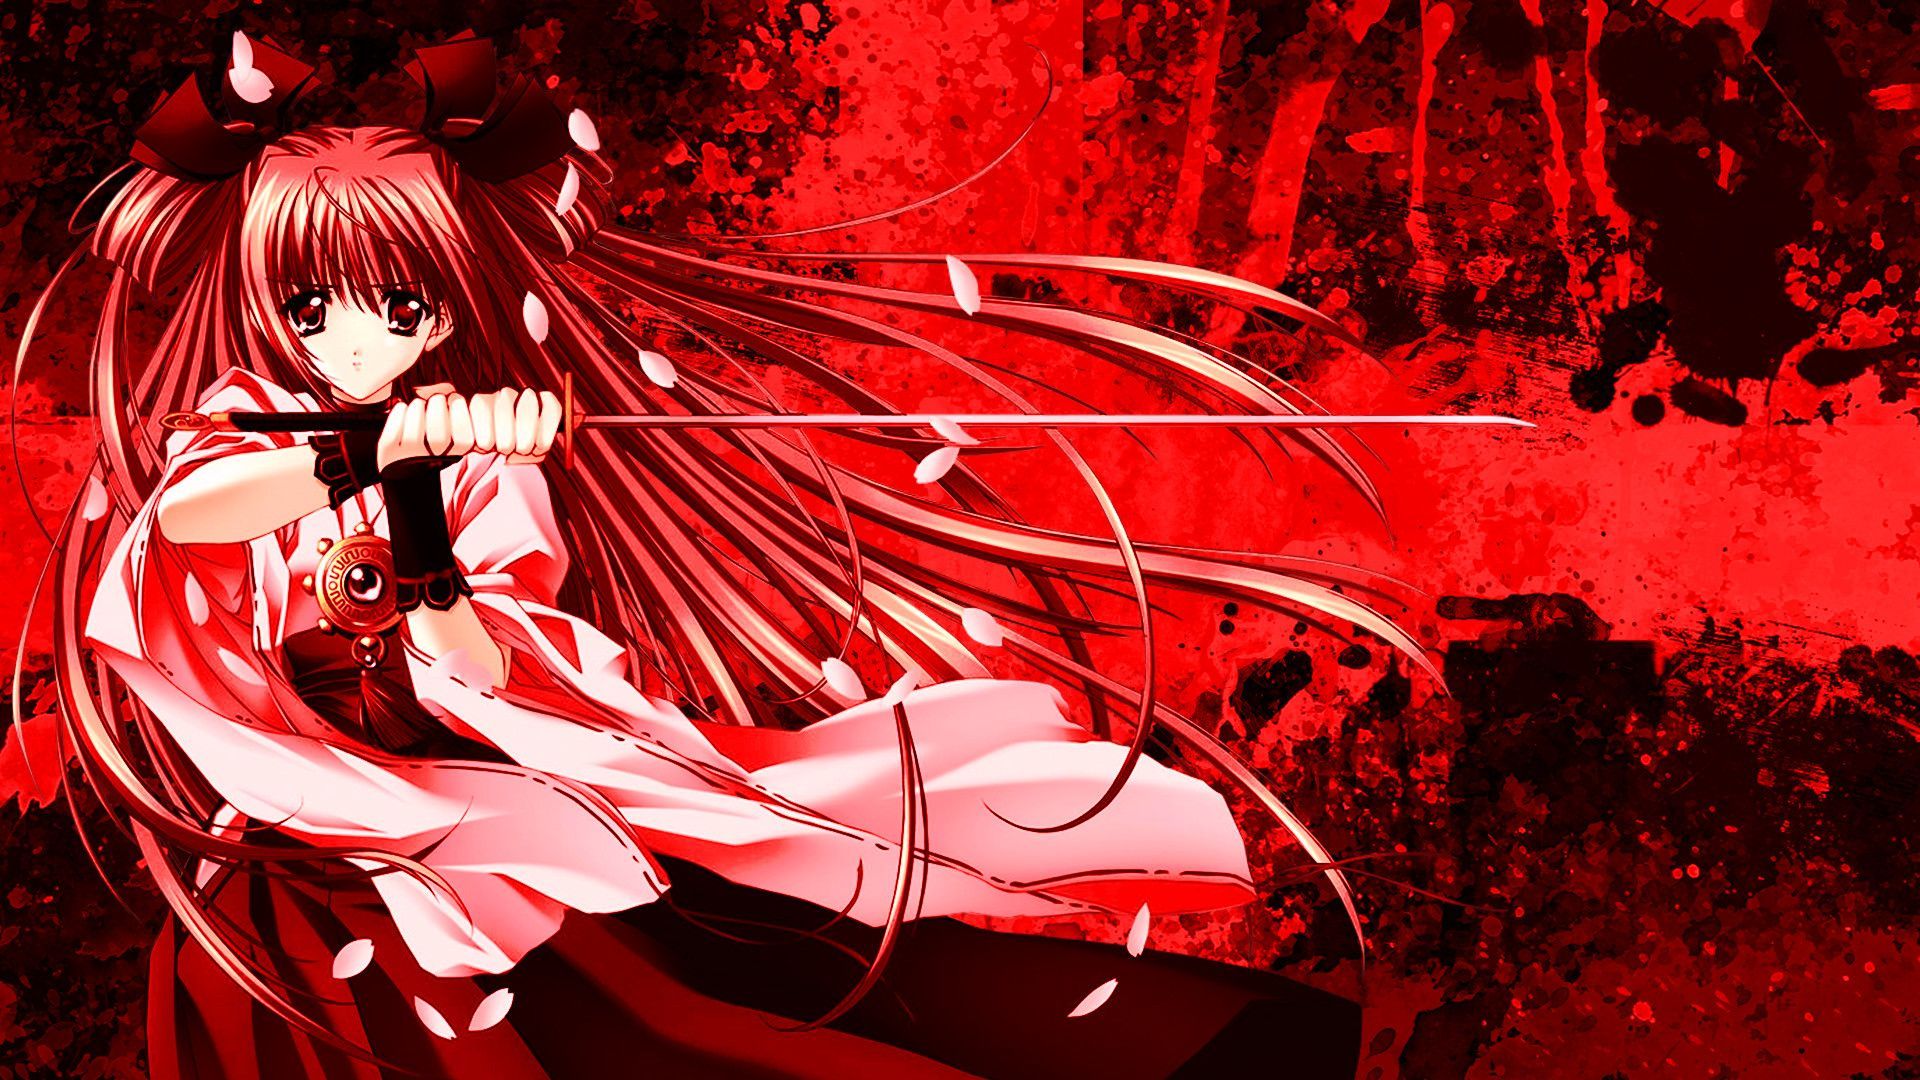 Red Anime Wallpaper Free Red .wallpaperaccess.com